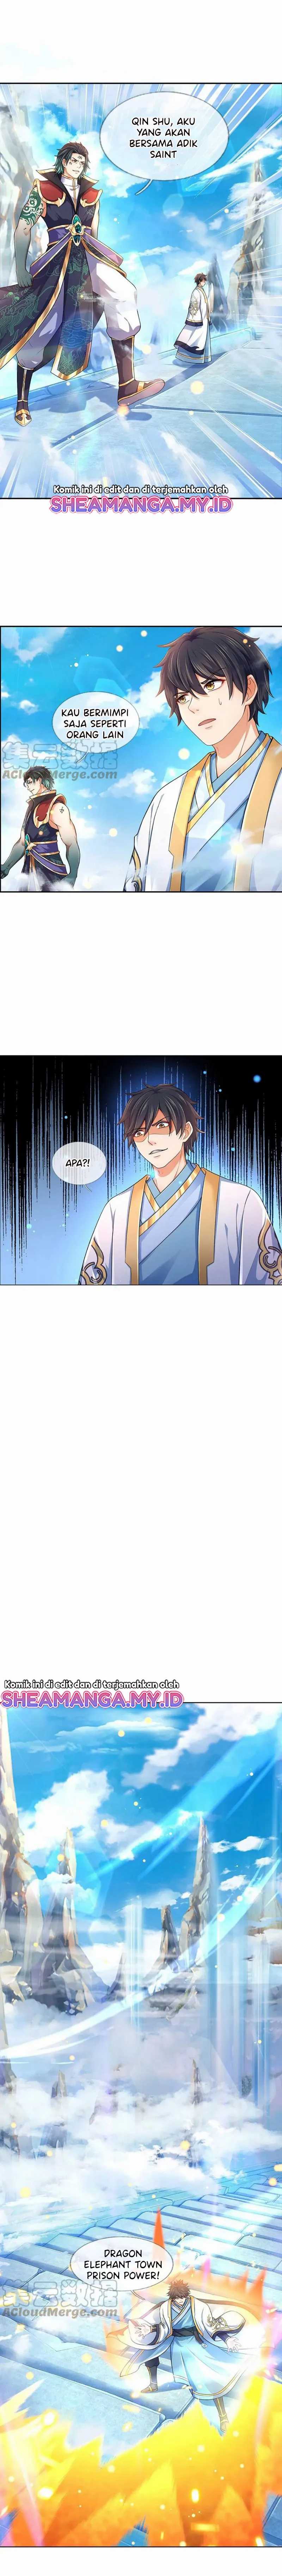 Star Sign In To Supreme Dantian Chapter 81